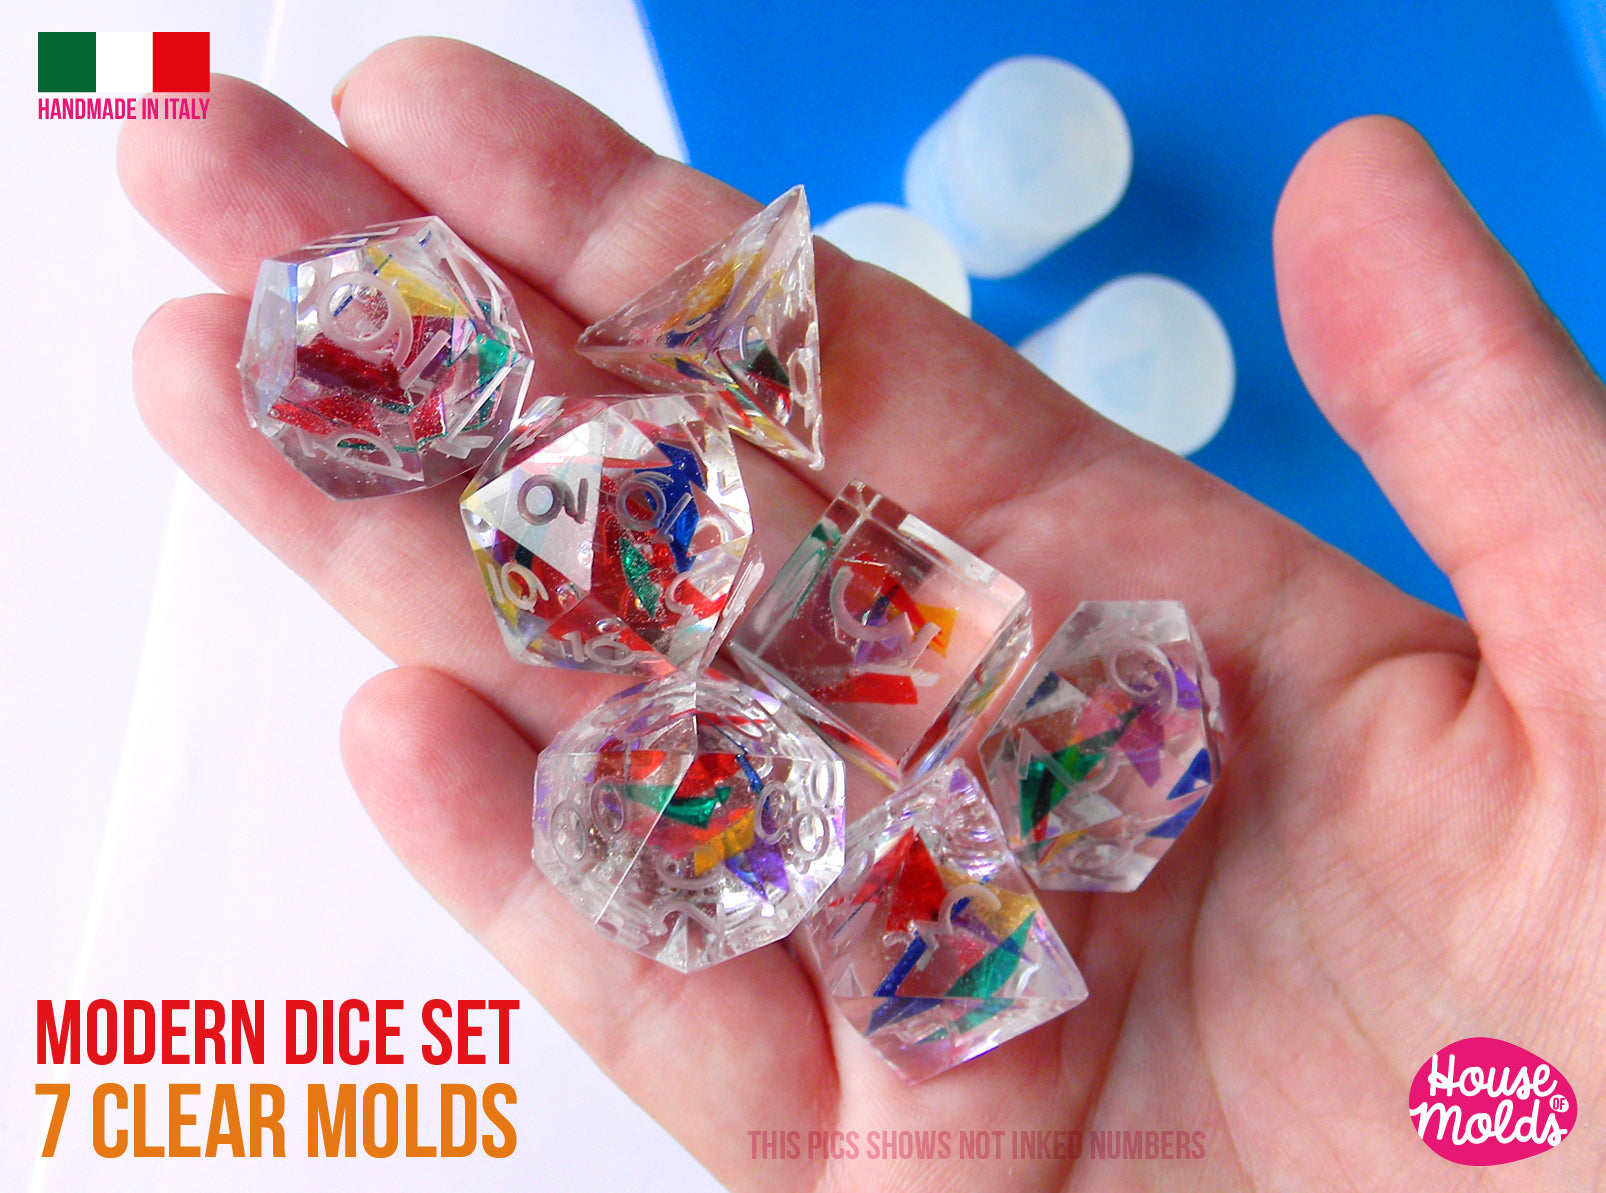 Dice Molds for Resin, 7 Shapes Sharp Edge Dice Silicone Mold with